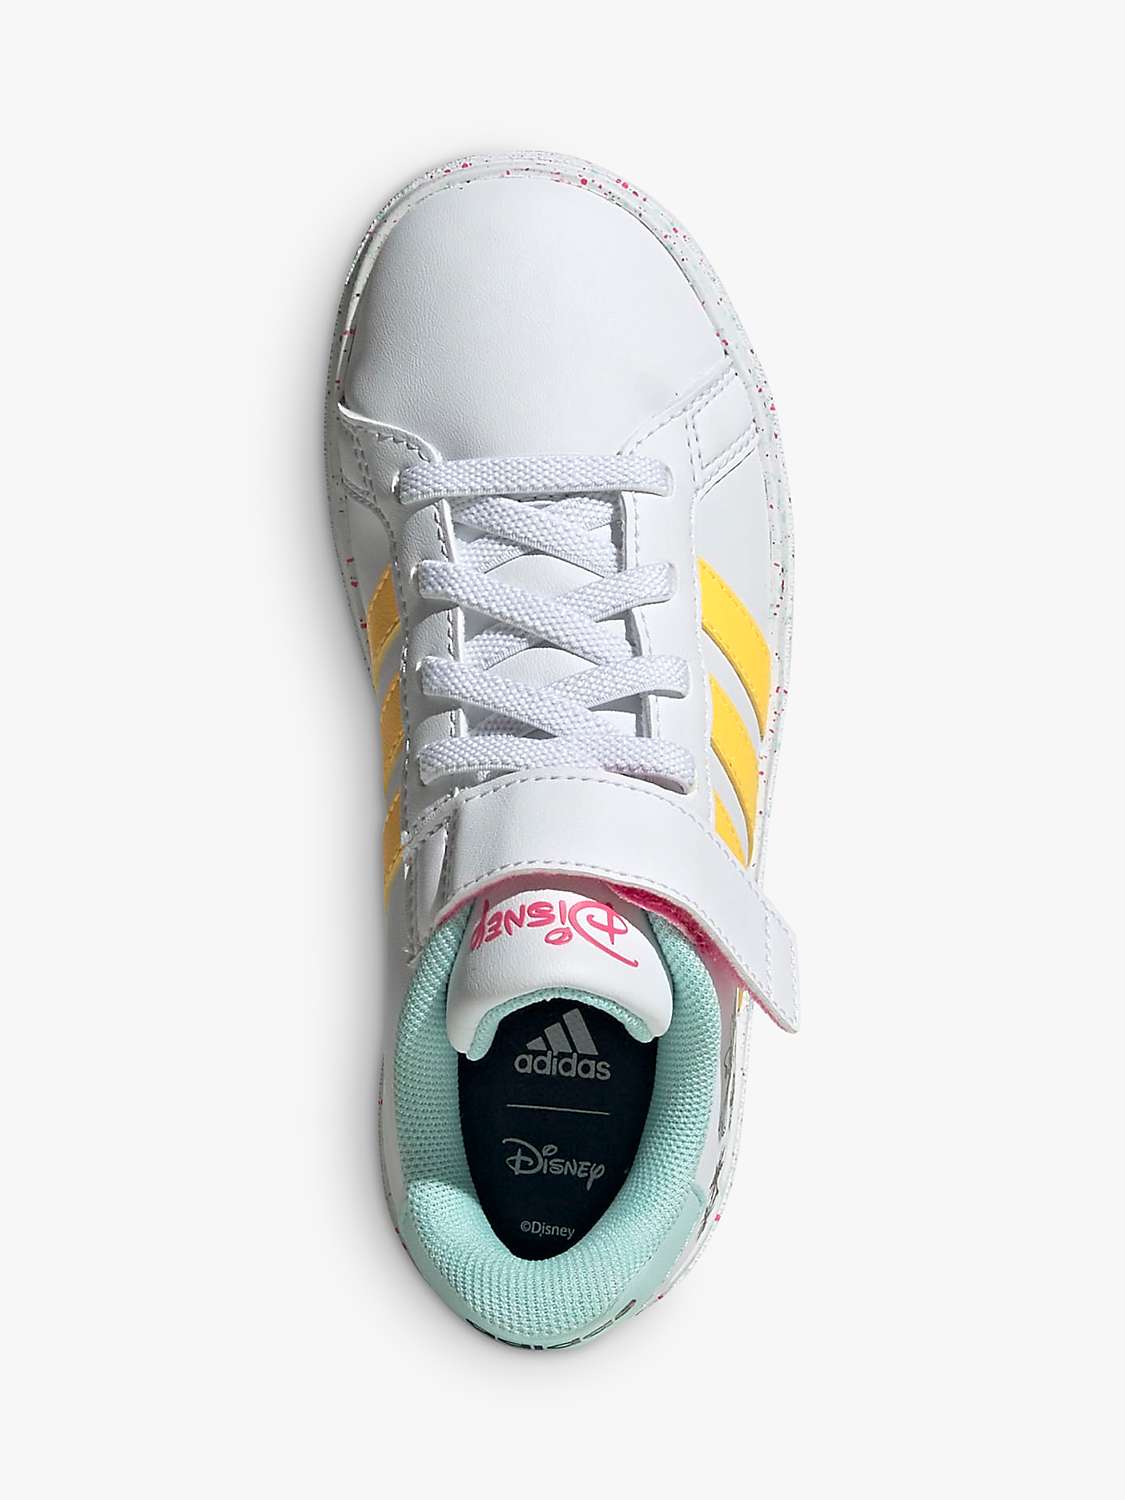 Buy adidas Kids' Grand Court X Disney Minnie Low Cut Trainers, White/Yellow Online at johnlewis.com